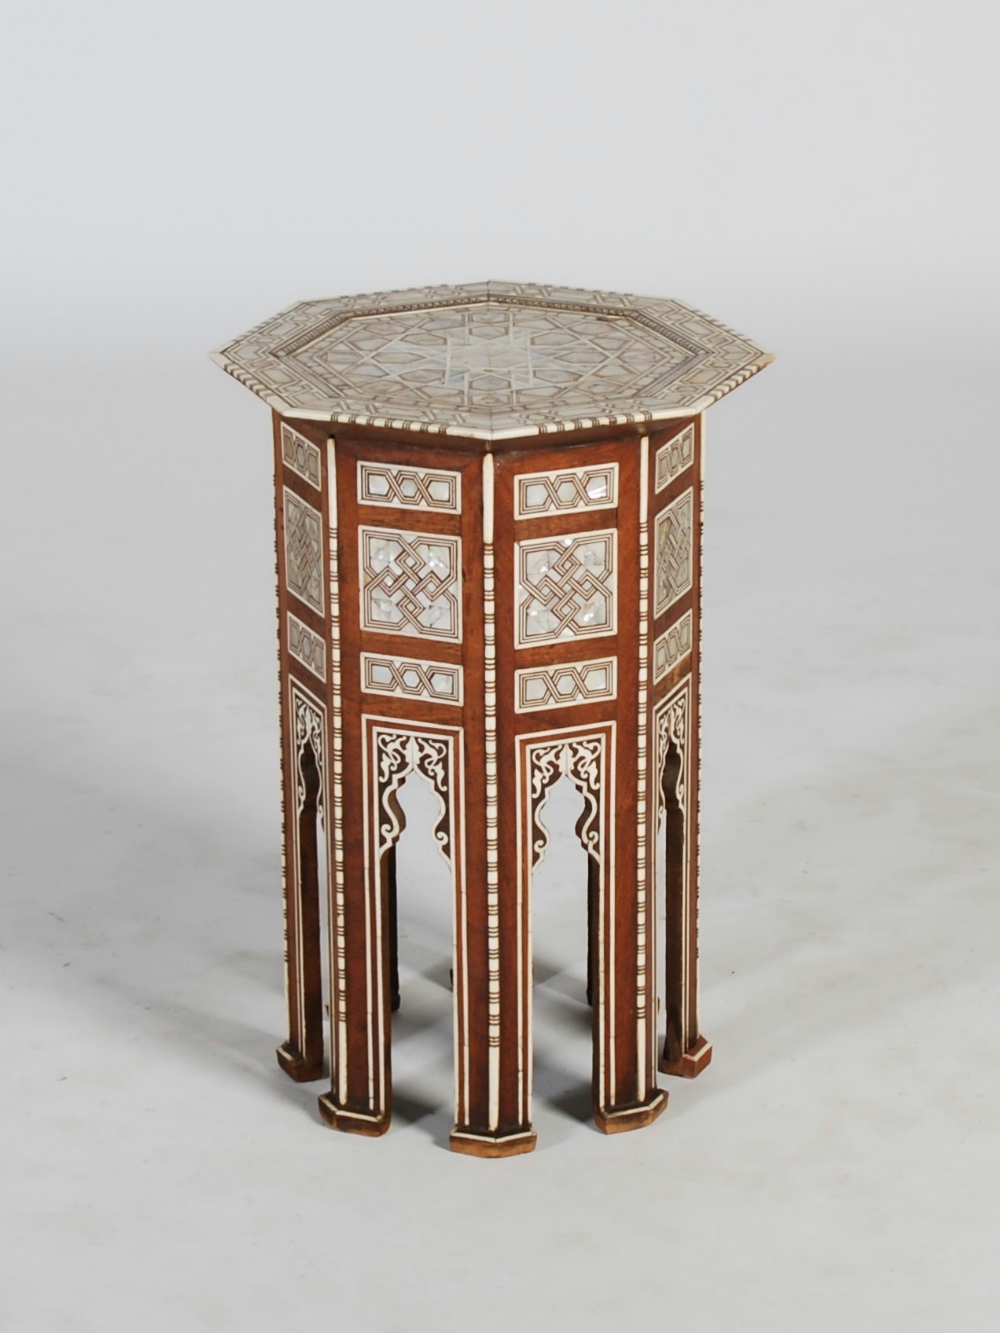 A late 19th/ early 20th century mother of pearl, bone and parquetry inlaid Eastern octagonal